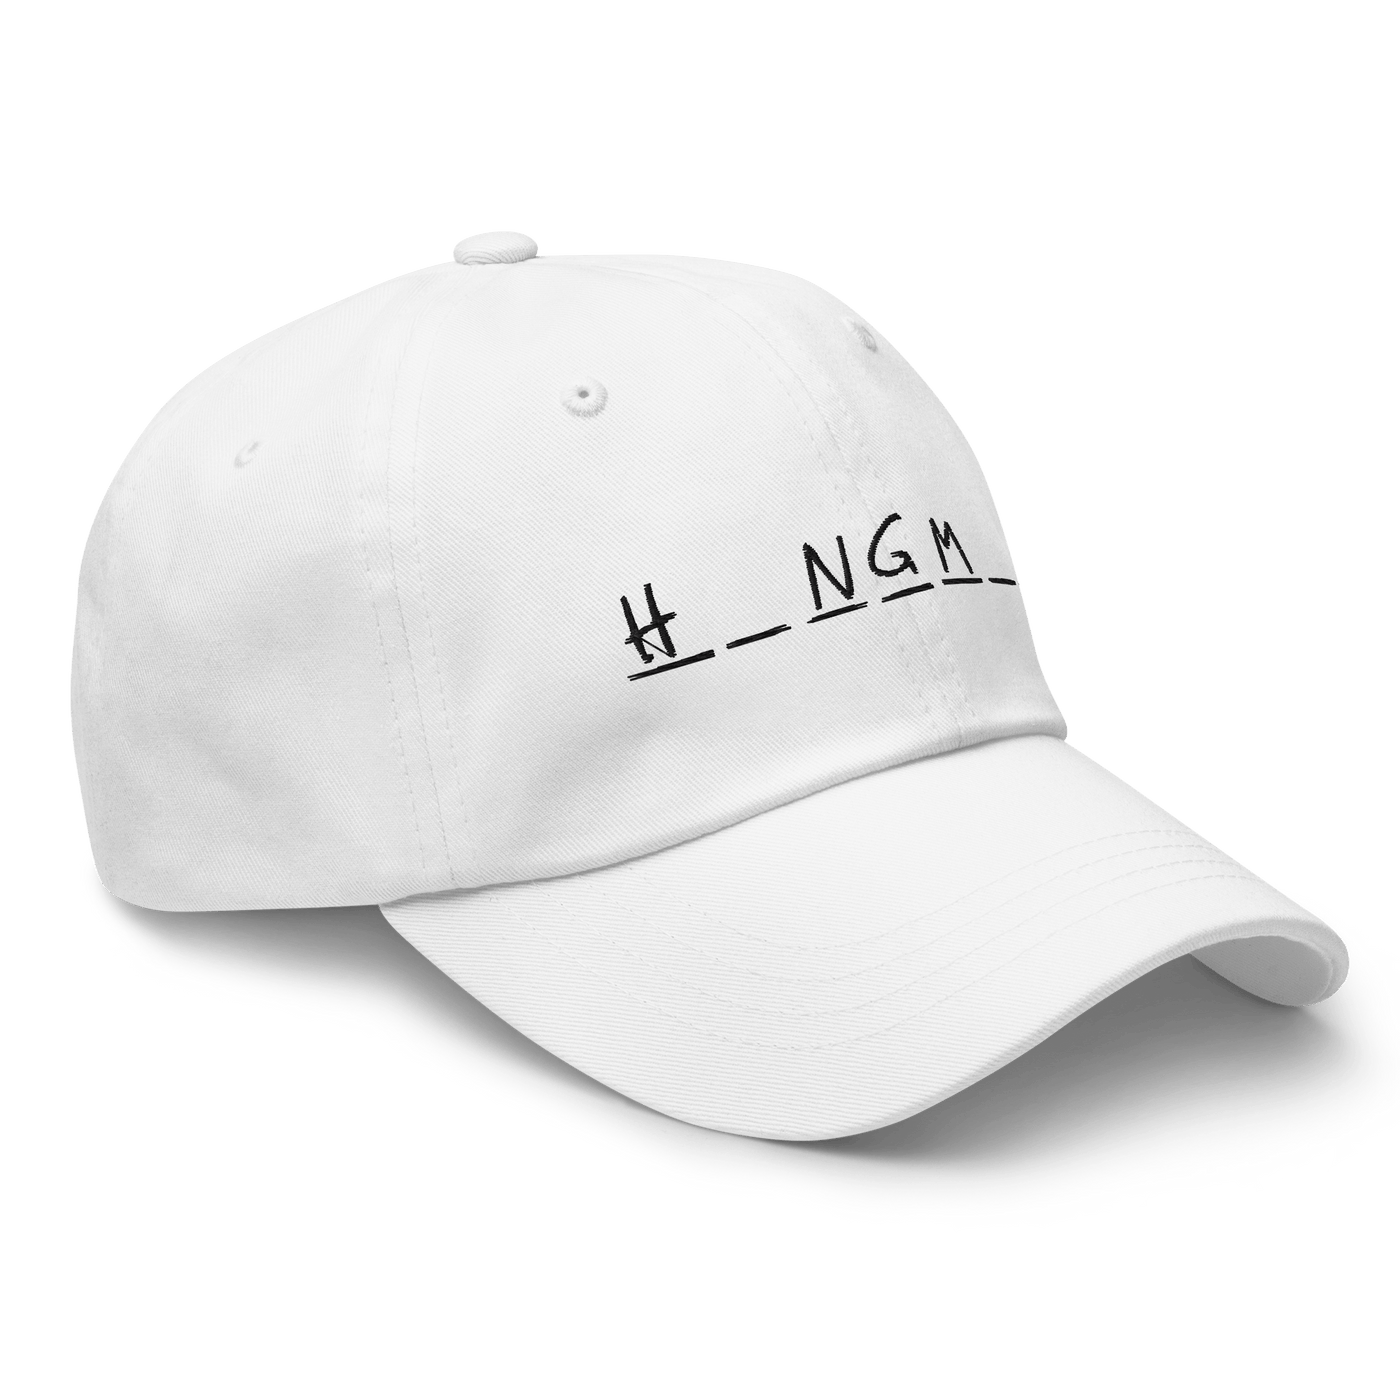 Hangman Dad hat - White - - Just Another Cap Store